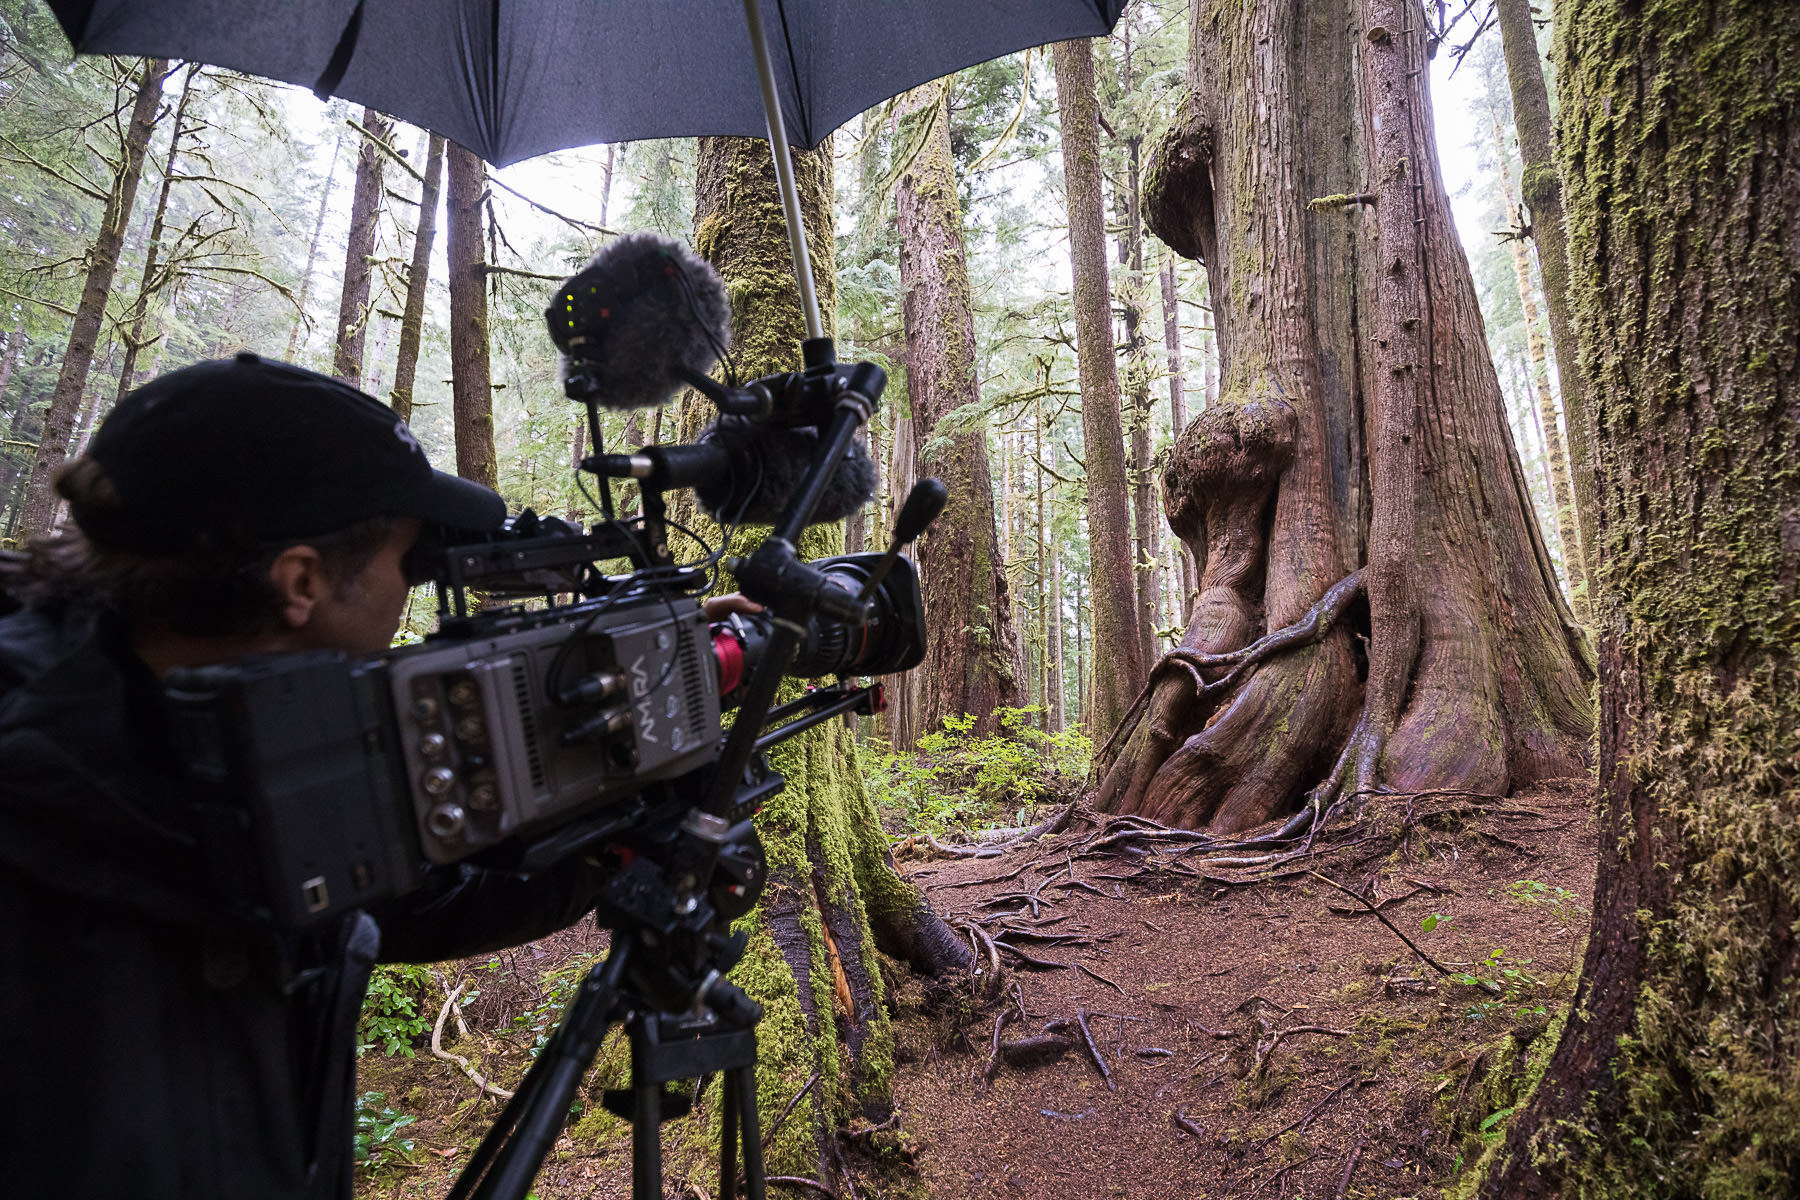 Need a “forest fix”? Watch our top 5 ancient forest films!